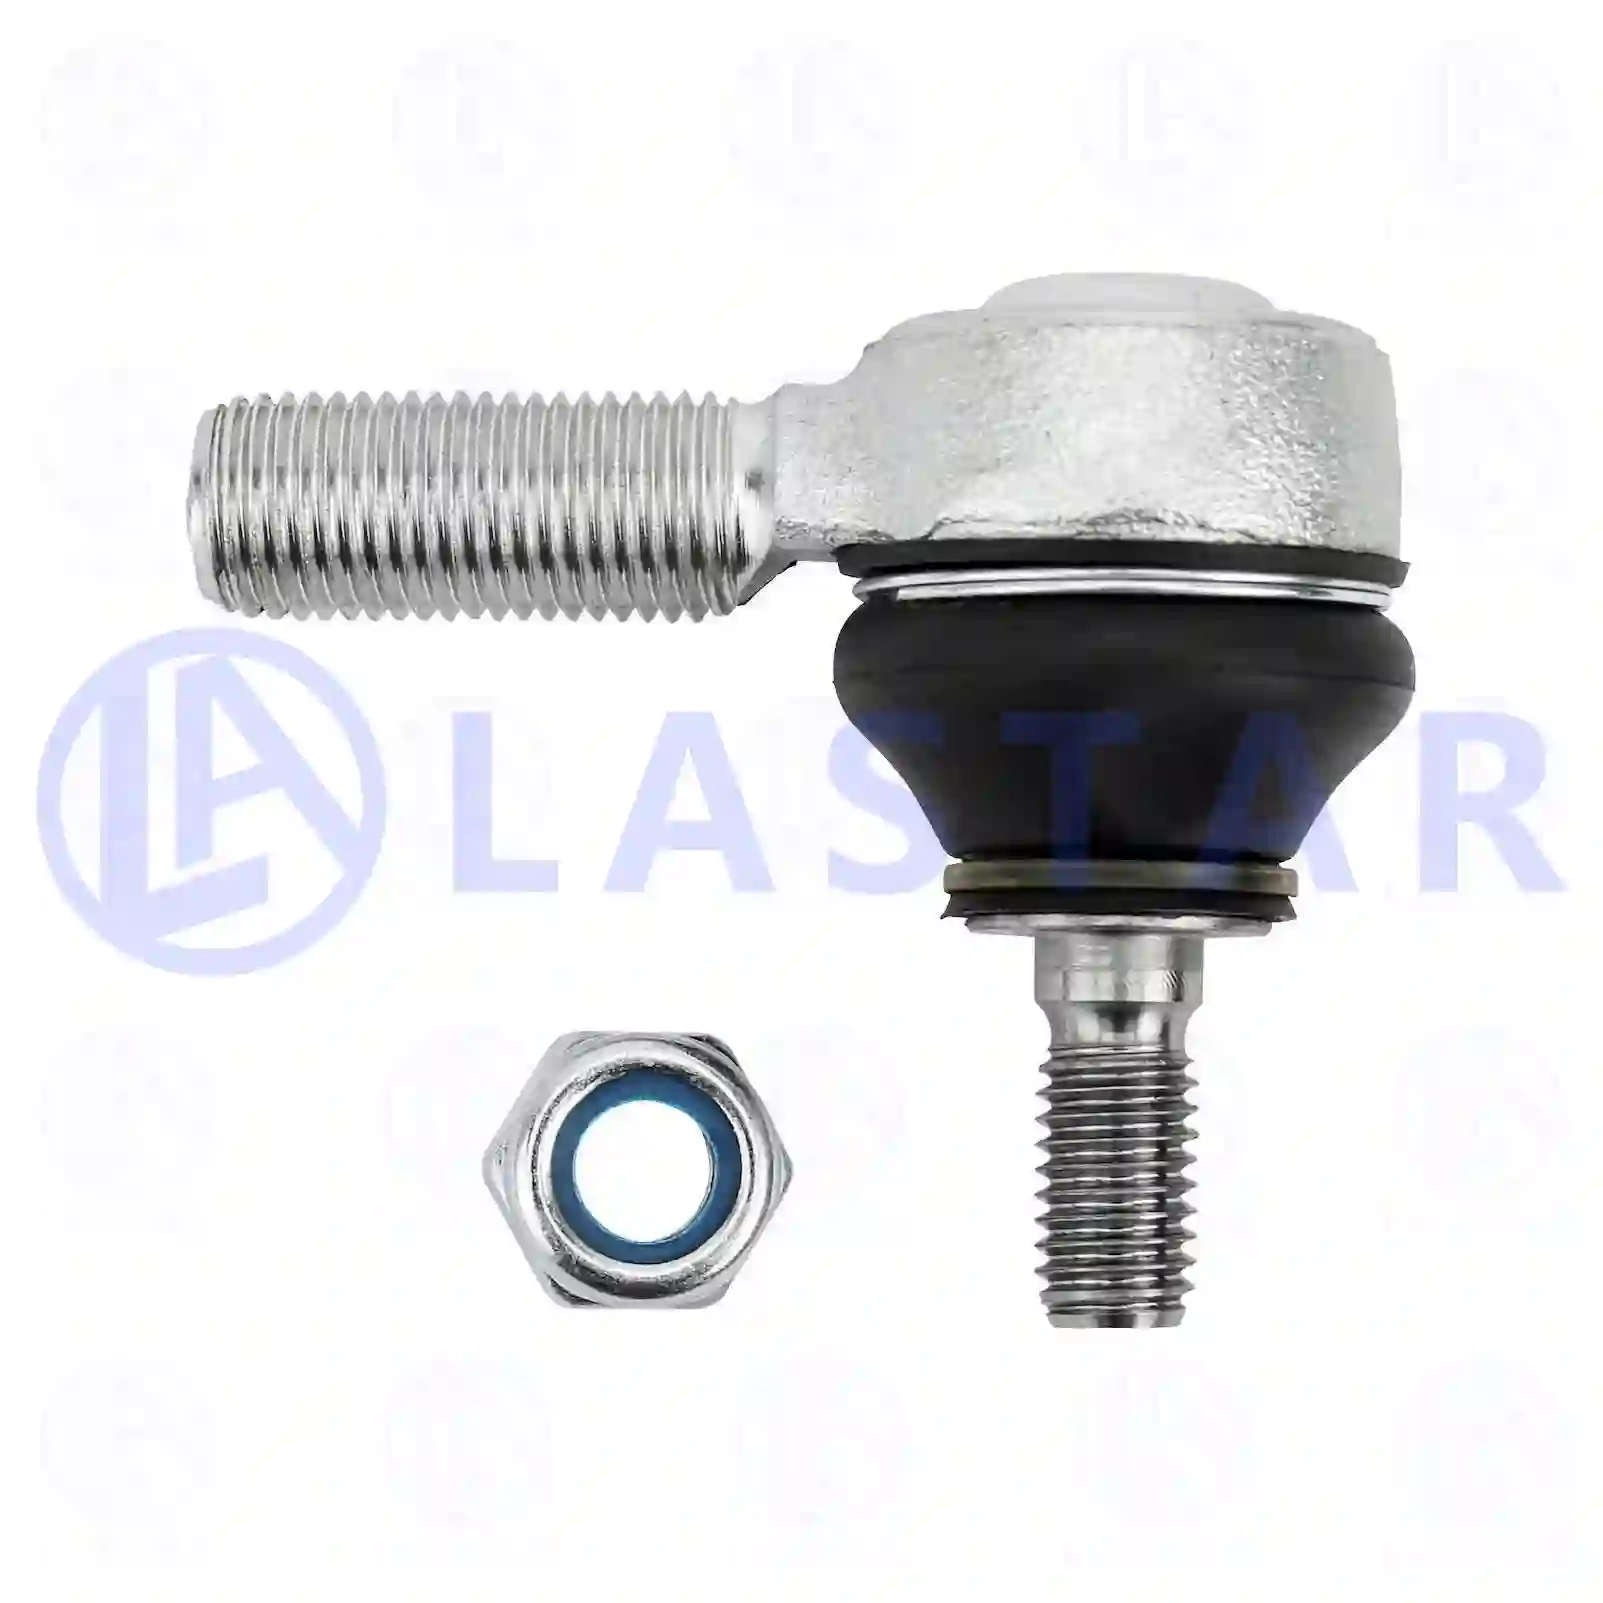 Ball joint, right hand thread, 77731848, 0009966845, 0009967045, 3759960045, ZG40144-0008 ||  77731848 Lastar Spare Part | Truck Spare Parts, Auotomotive Spare Parts Ball joint, right hand thread, 77731848, 0009966845, 0009967045, 3759960045, ZG40144-0008 ||  77731848 Lastar Spare Part | Truck Spare Parts, Auotomotive Spare Parts